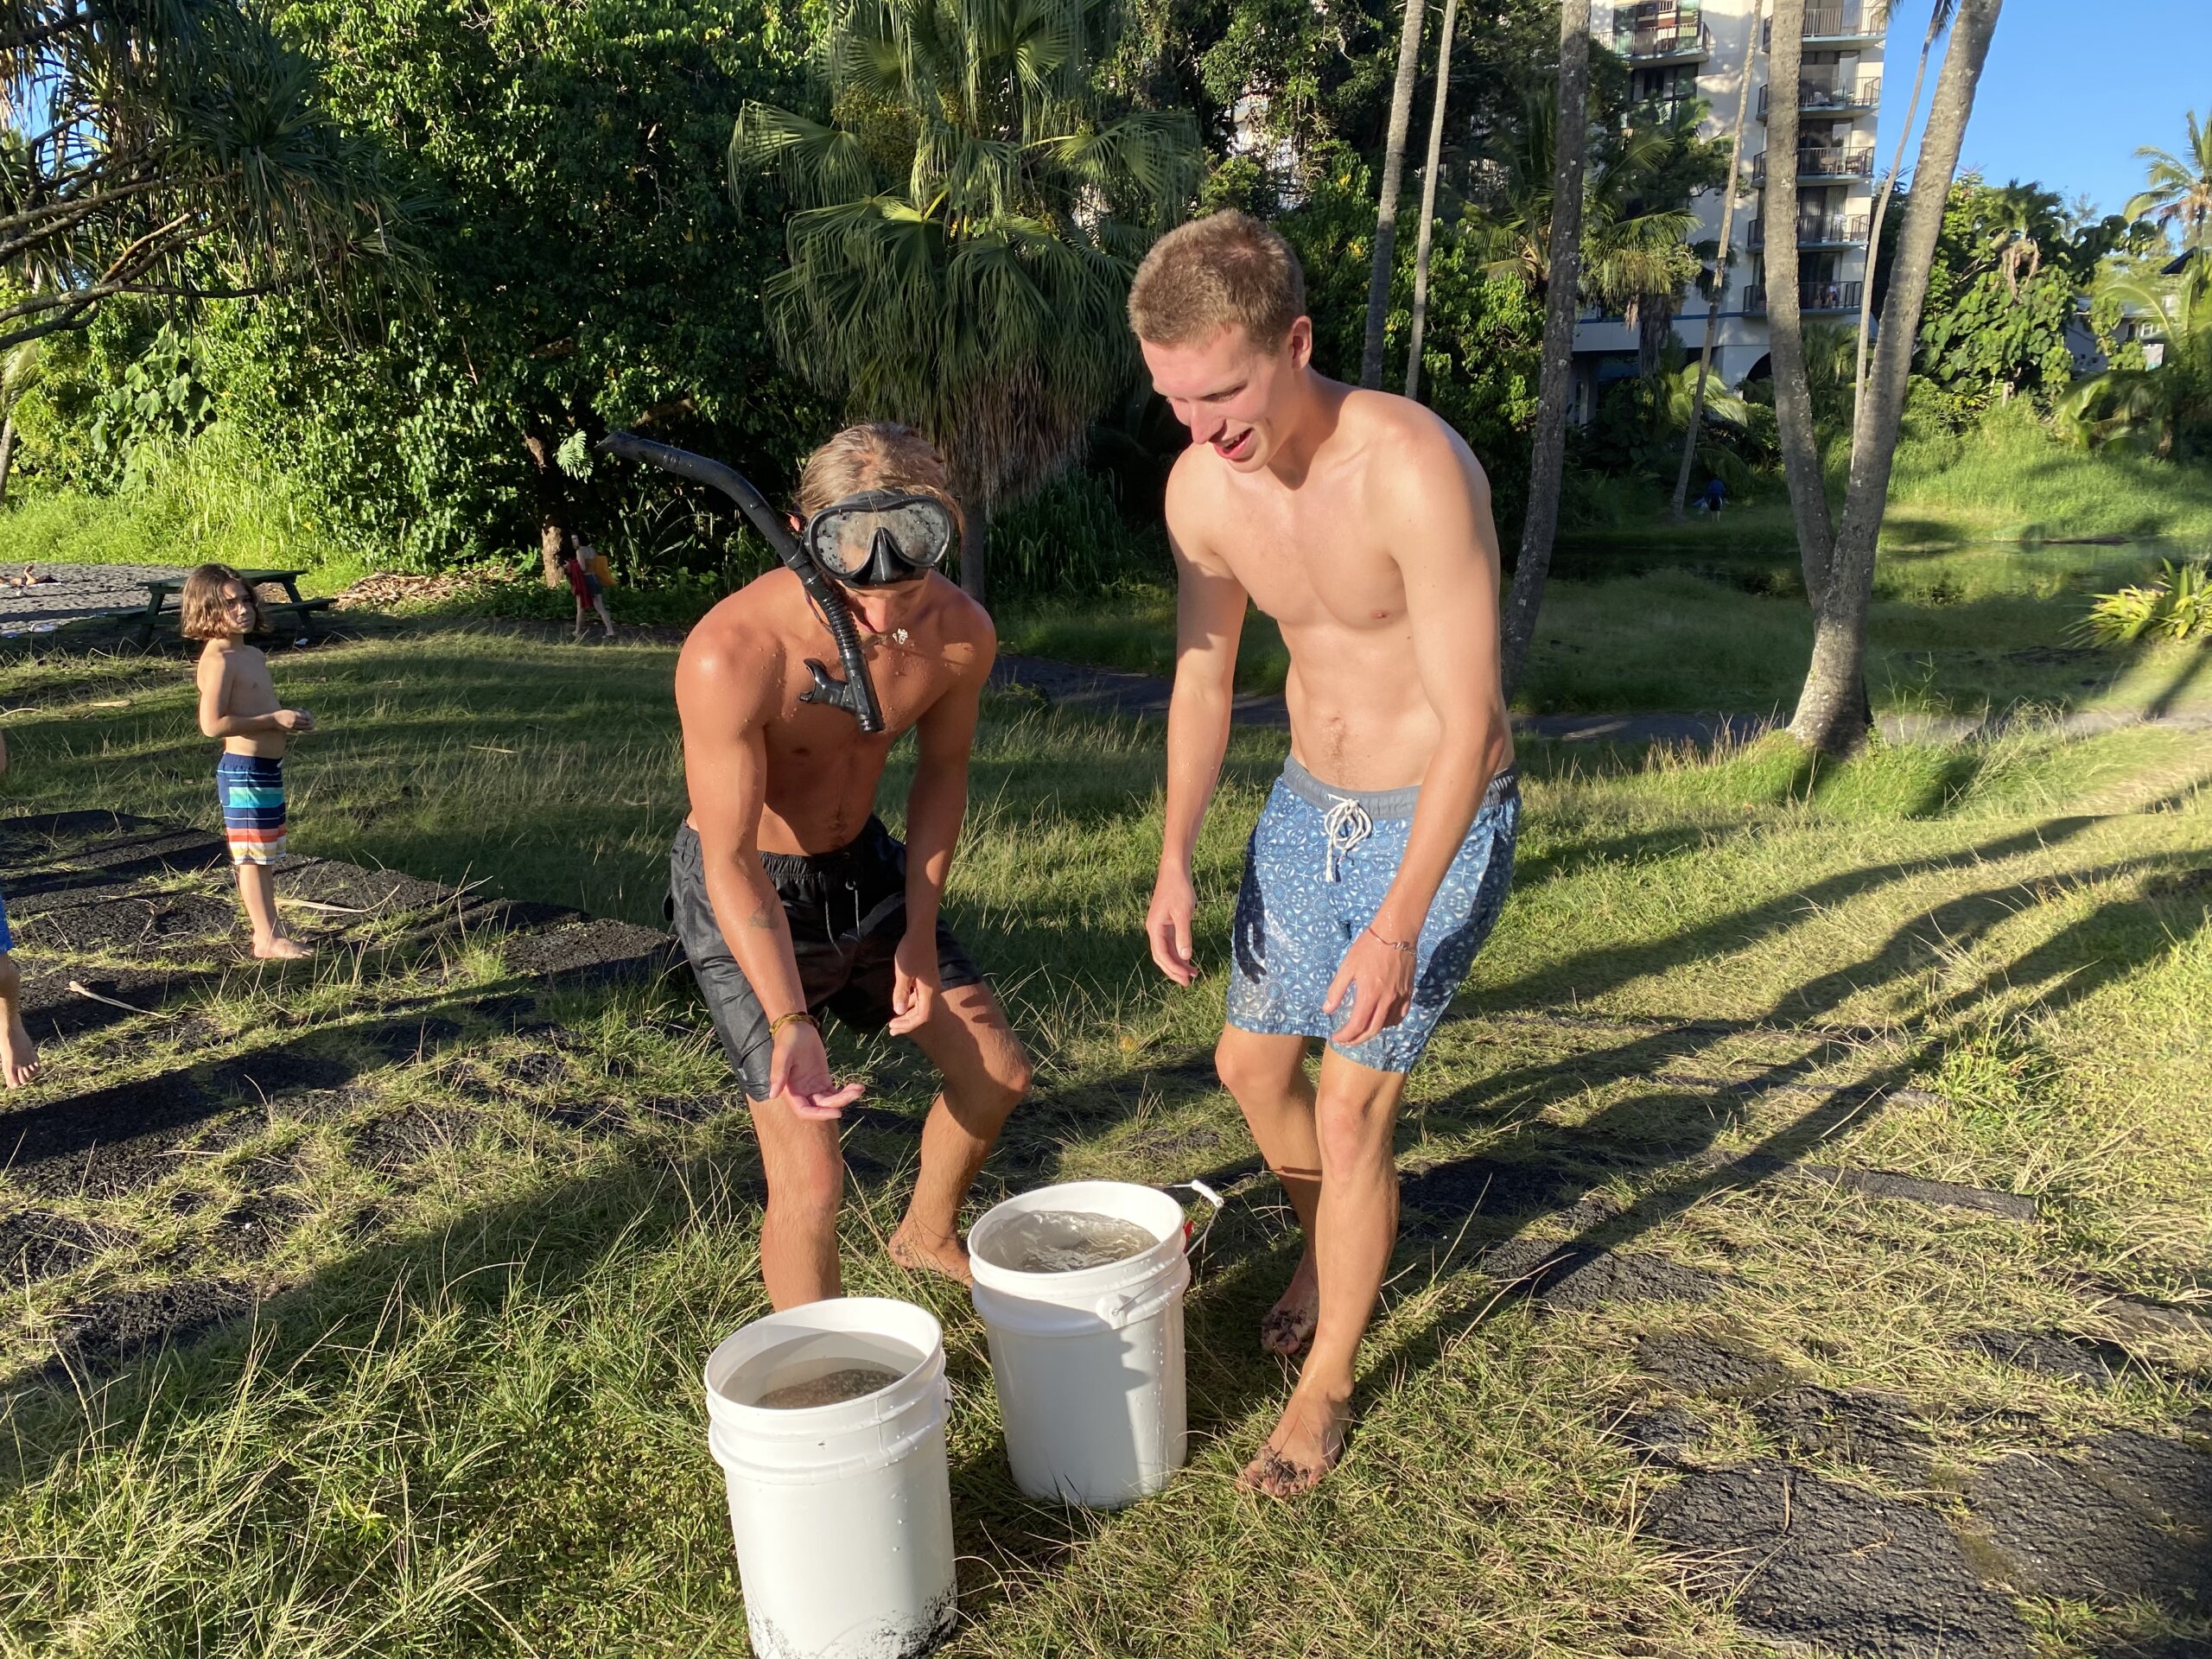 Cal Poly students collect ocean water for research on the Big Island of Hawaii